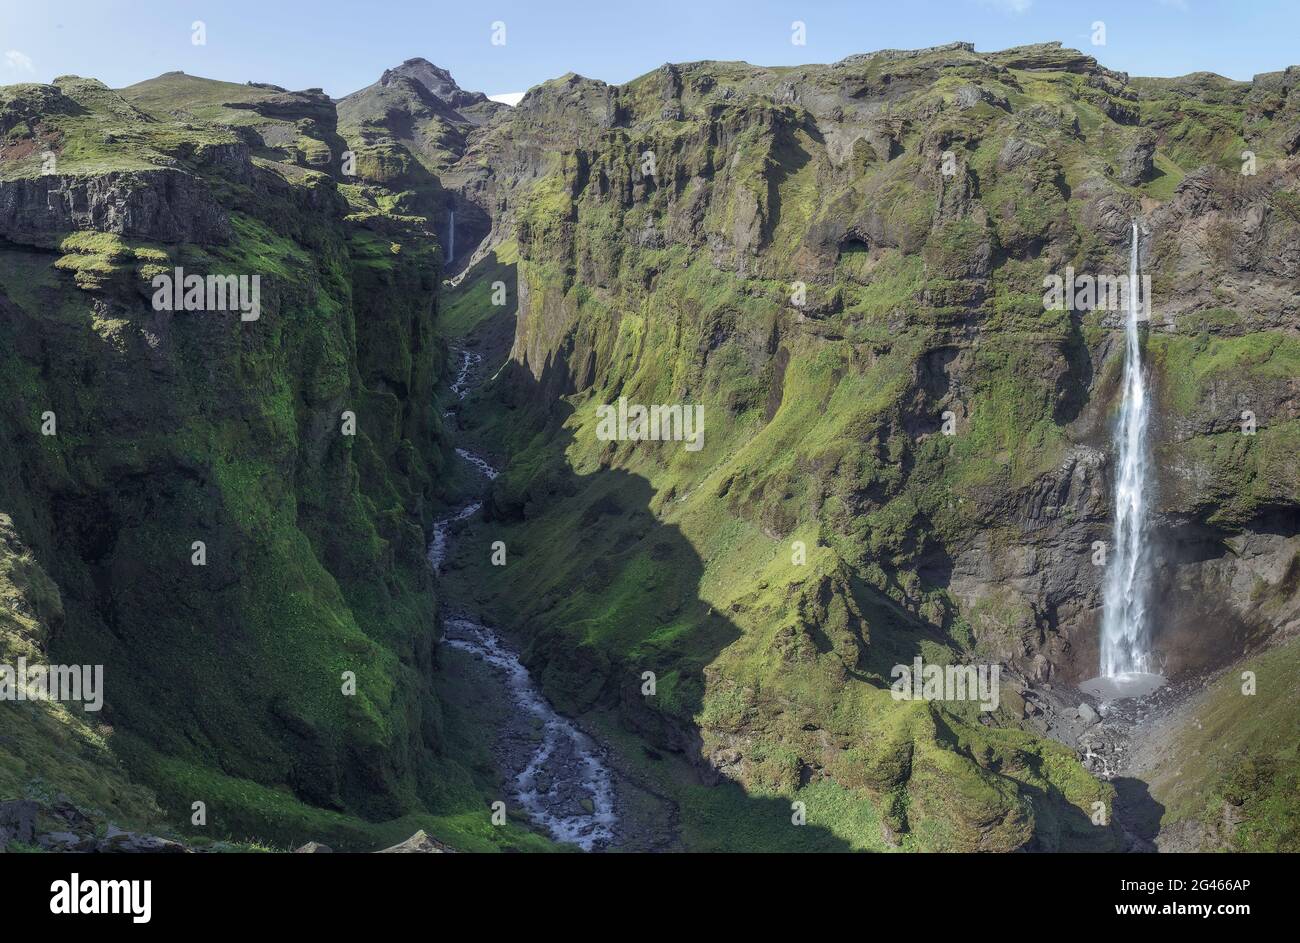 Stunning View of Secret Canyon with Double Waterfall in Iceland Stock Photo  - Alamy